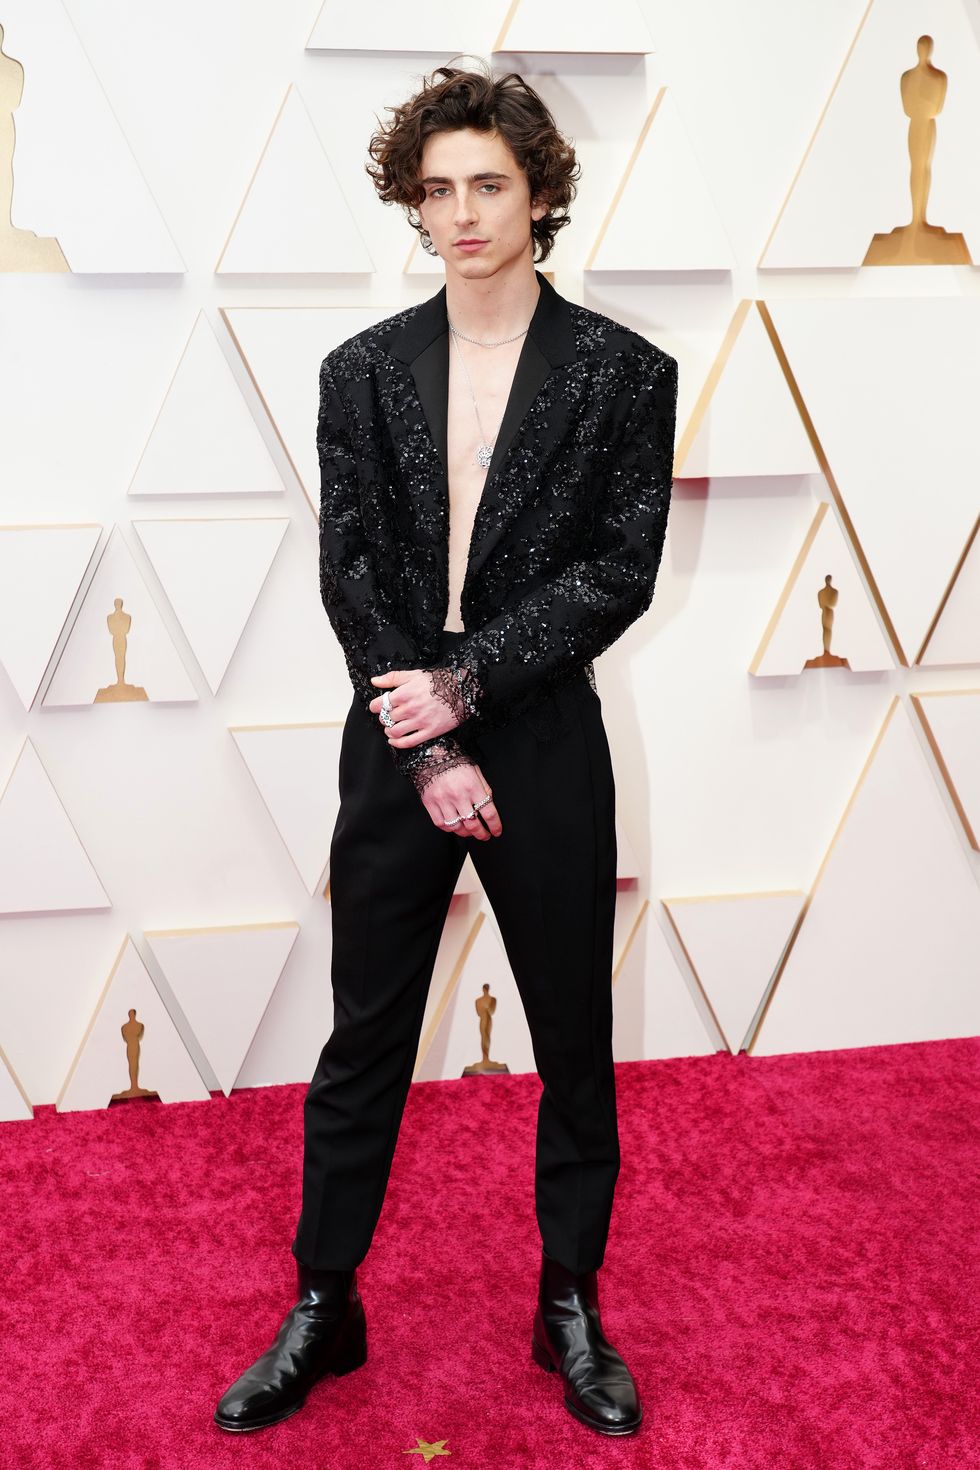 hollywood, california march 27 timothée chalamet attends the 94th annual academy awards at hollywood and highland on march 27, 2022 in hollywood, california photo by jeff kravitzfilmmagic